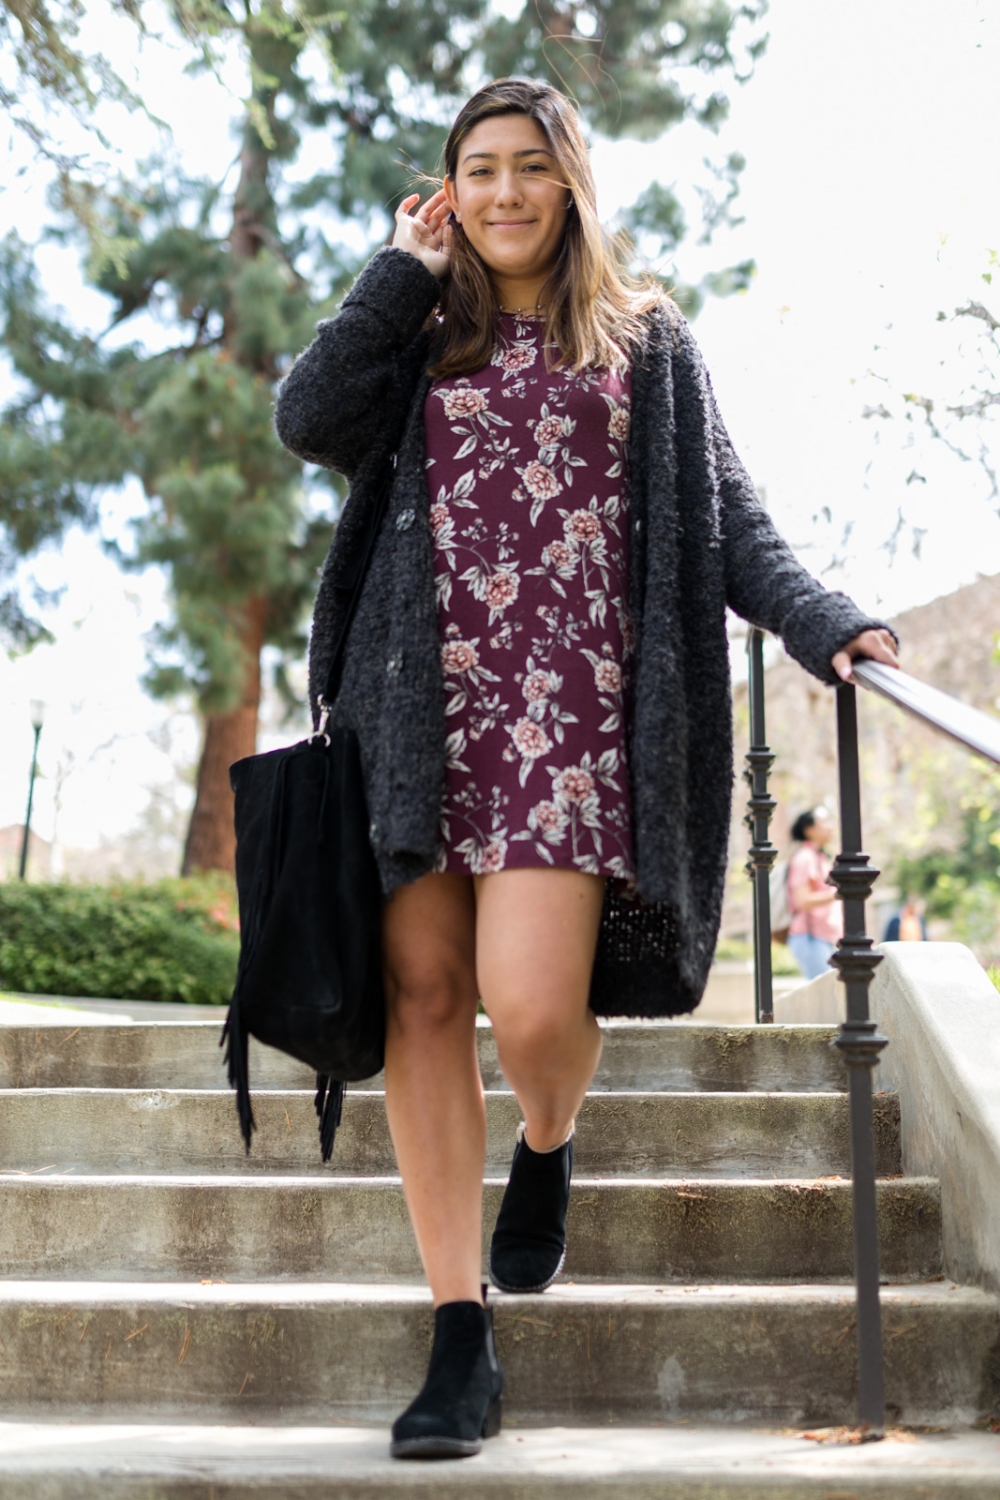 Black Floral Dress Black Cardigan Tights and Booties Outfit